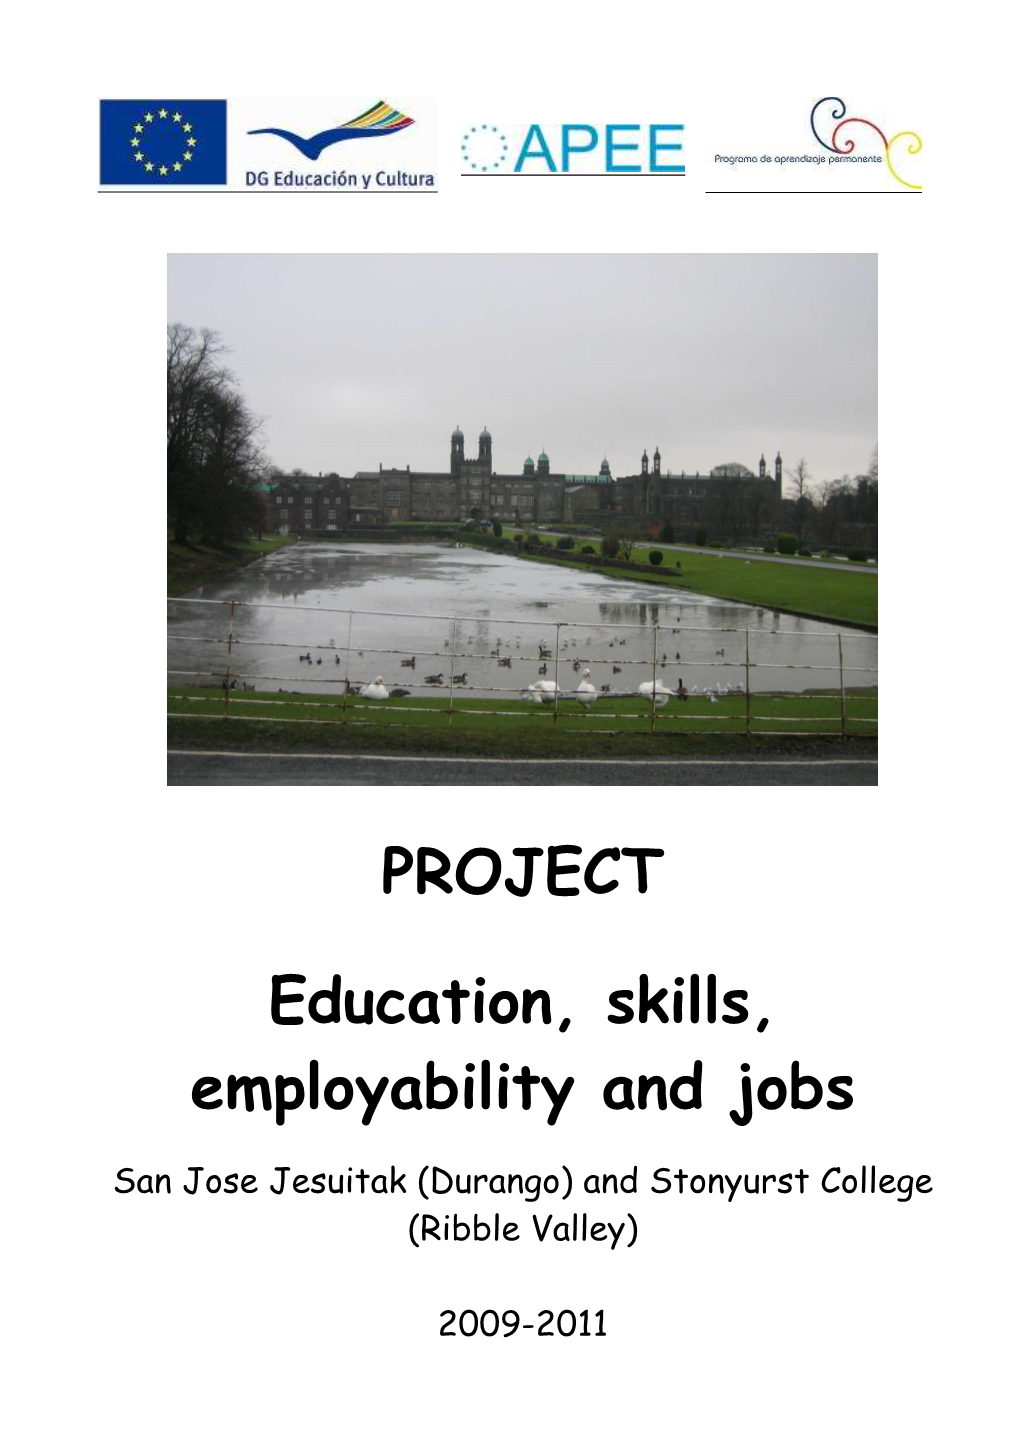 PROJECT Education, Skills, Employability and Jobs